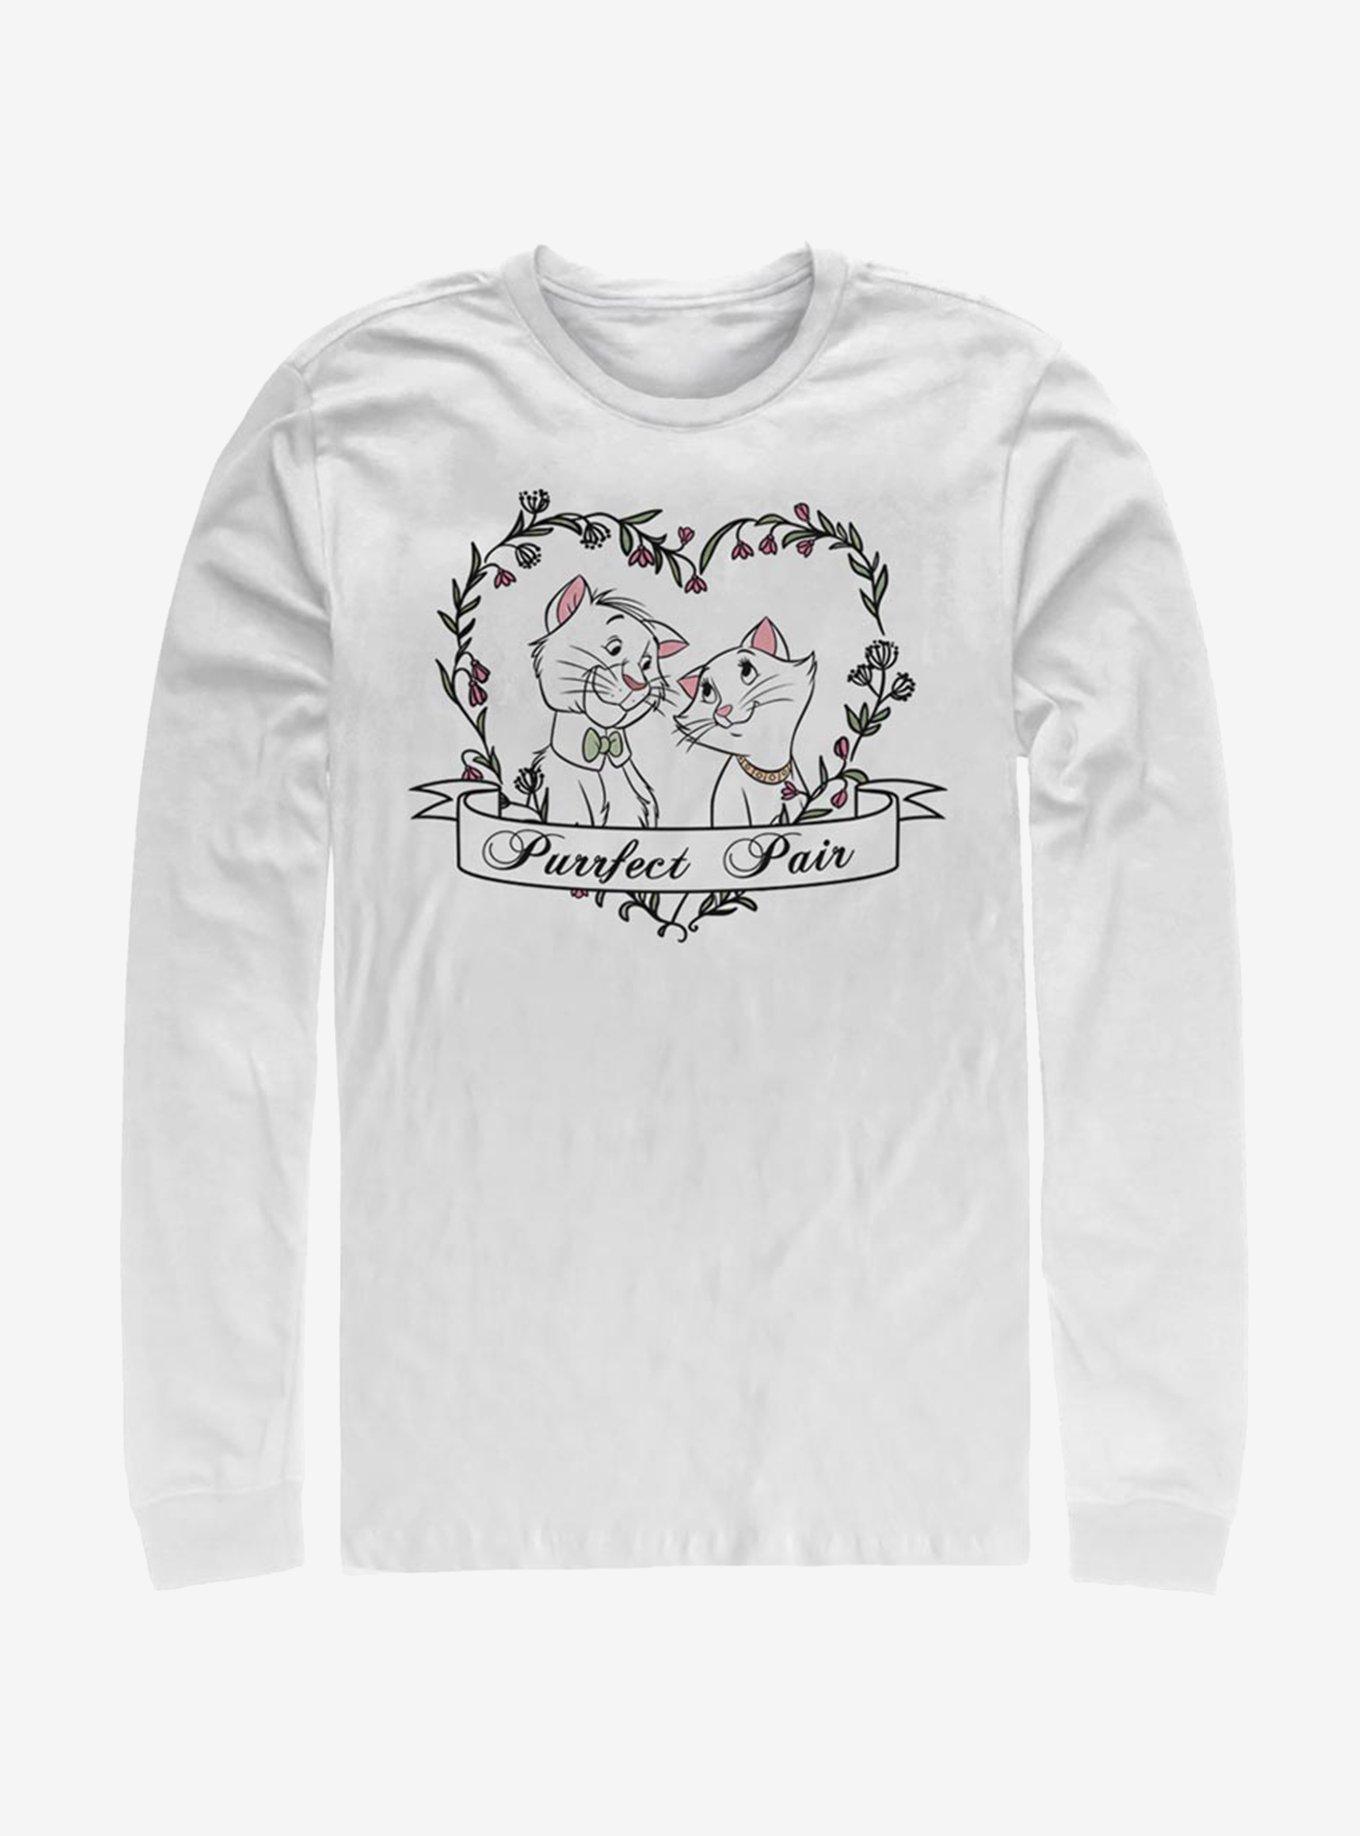 Disney The Aristocats Duchess And O'Malley Purrfect Long-Sleeve T-Shirt, WHITE, hi-res